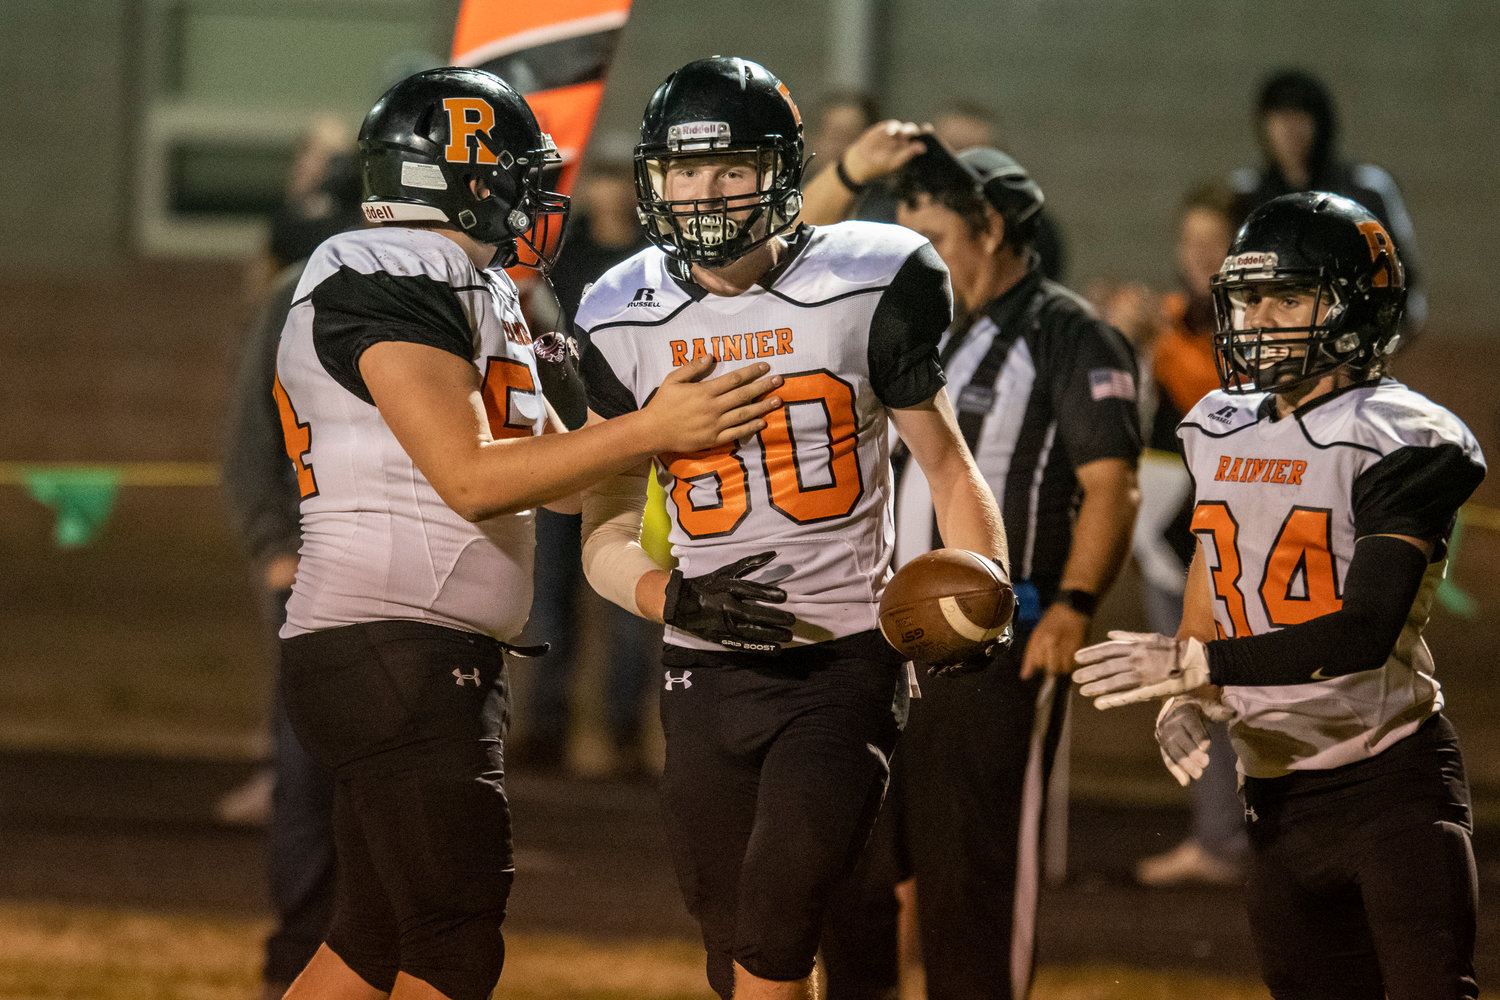 Rainier's John Kenney (80) gets congratulated after hauling in a touchdown reception in the second quarter against Raymond-South Bend on Oct. 7 in Raymond.